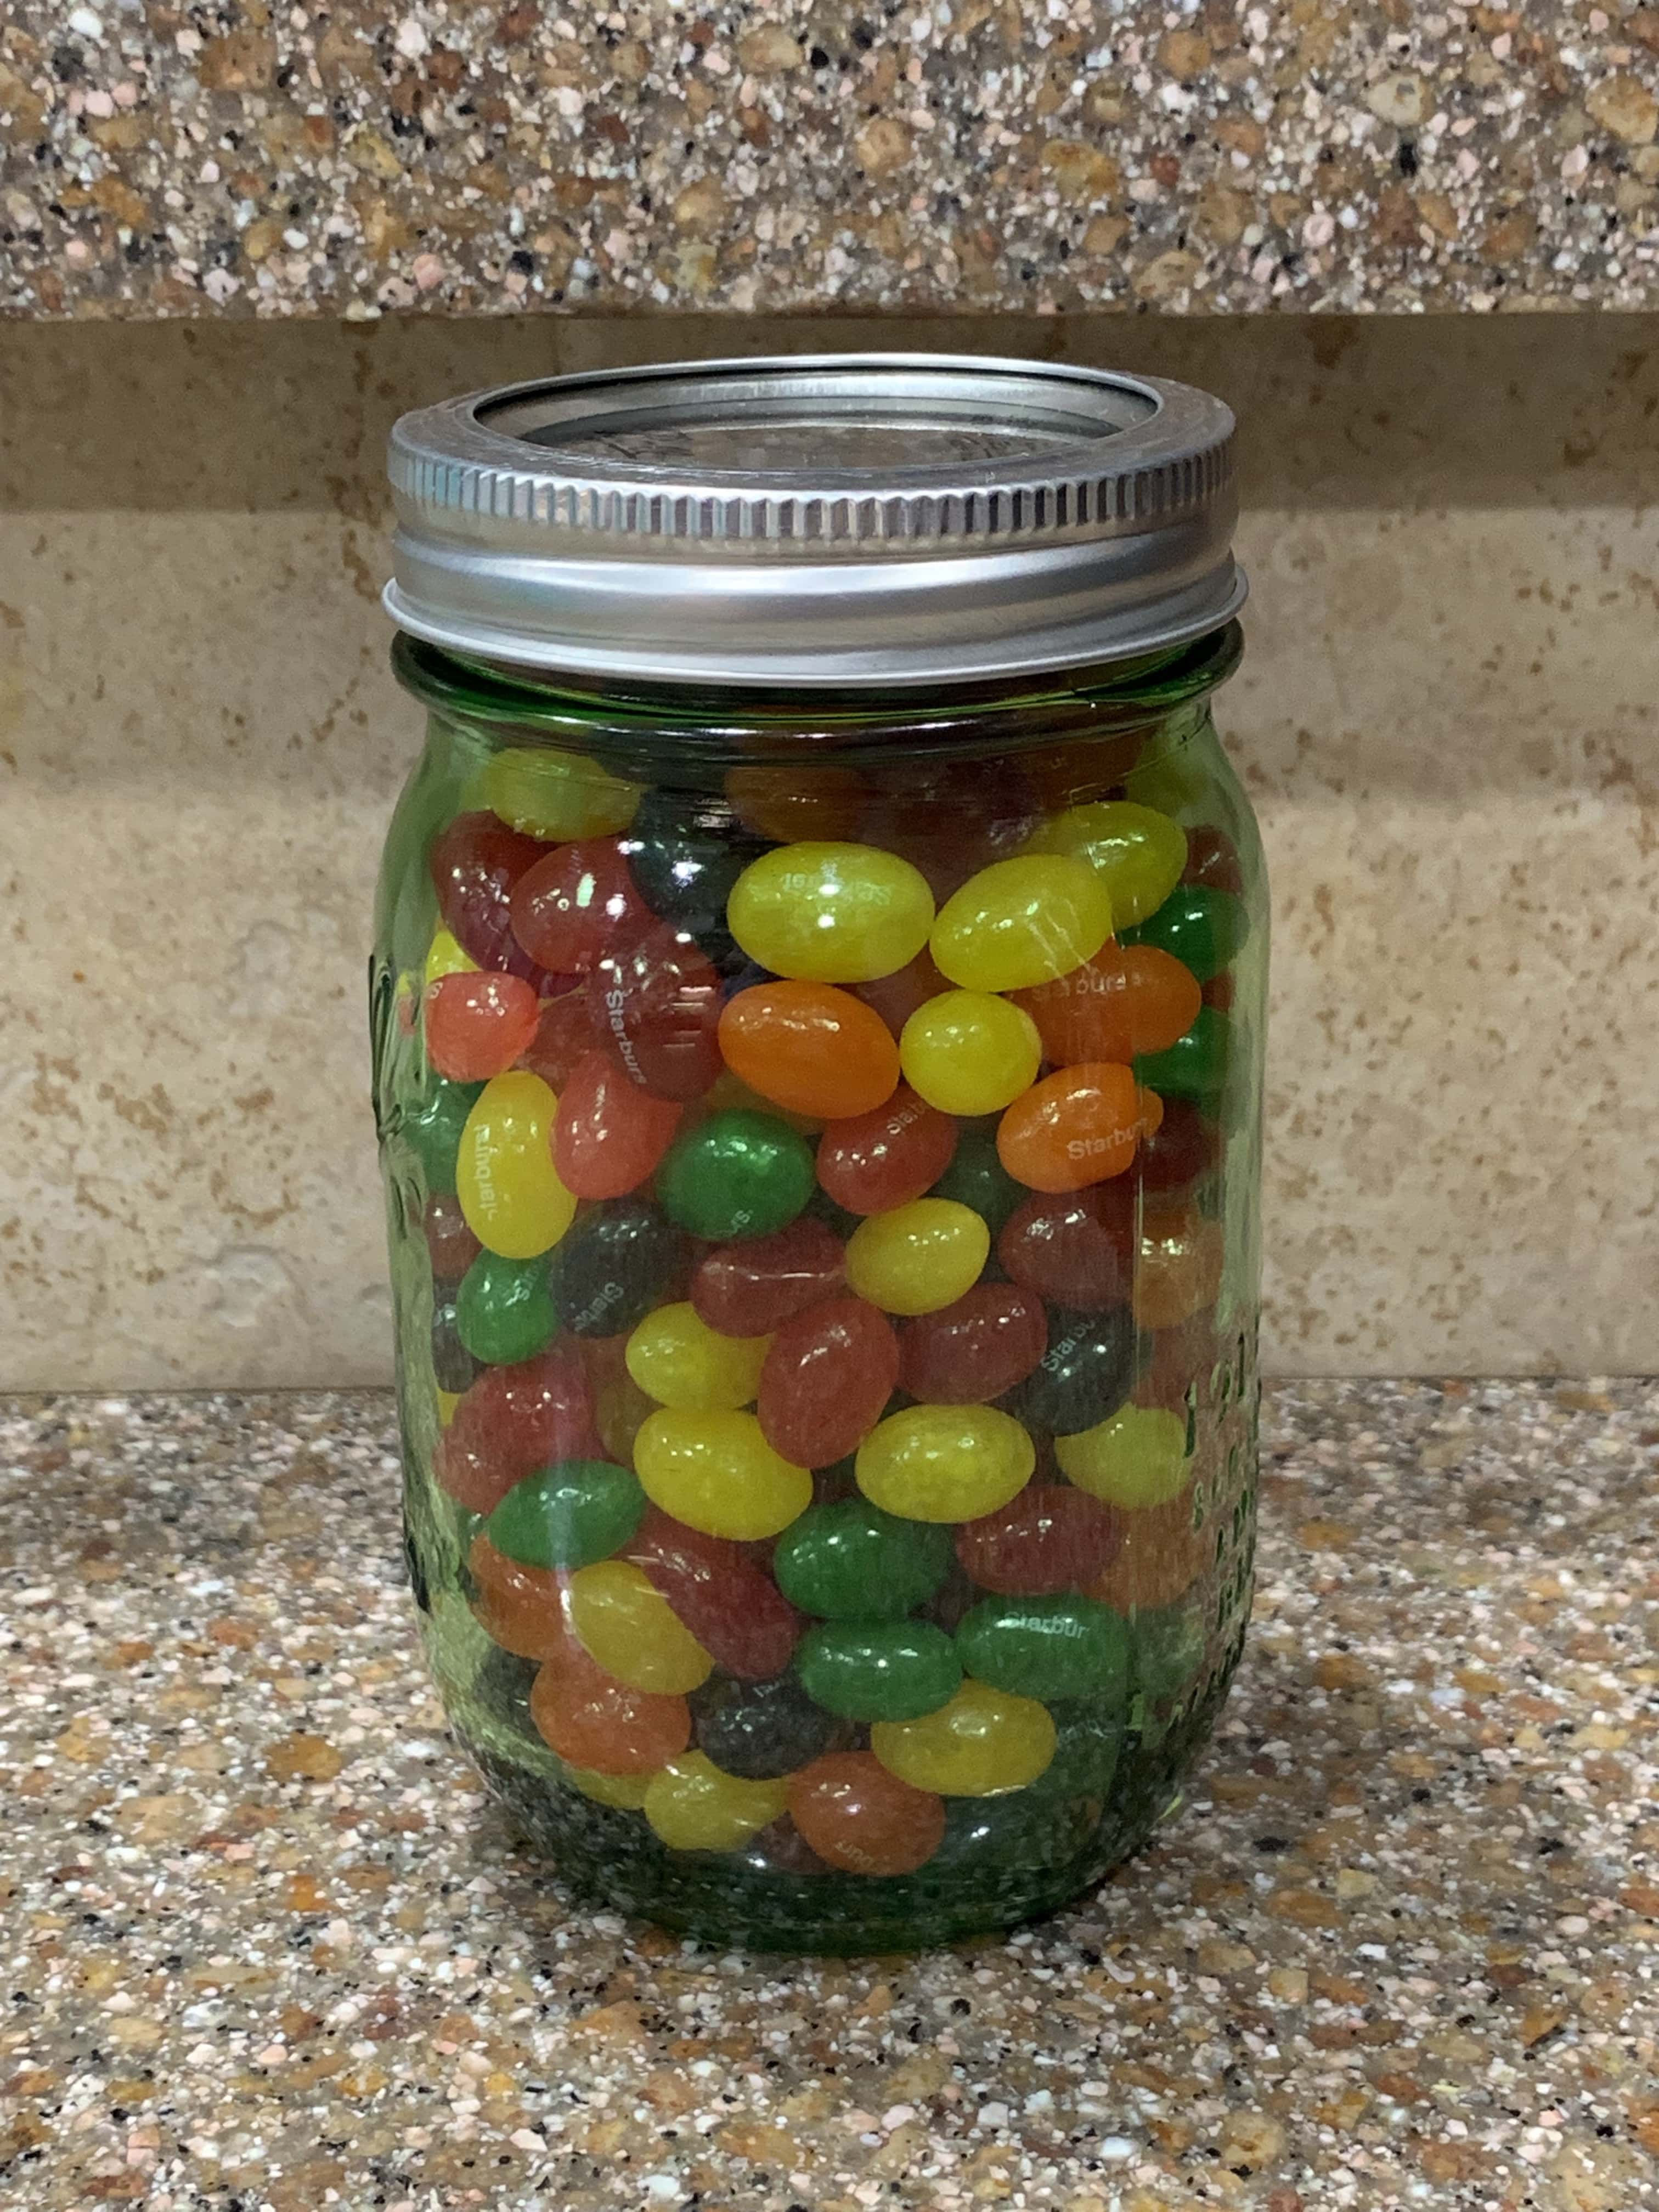 Win Miranda Lambert Tickets! Guess How Many Jelly Beans Are In This Jar